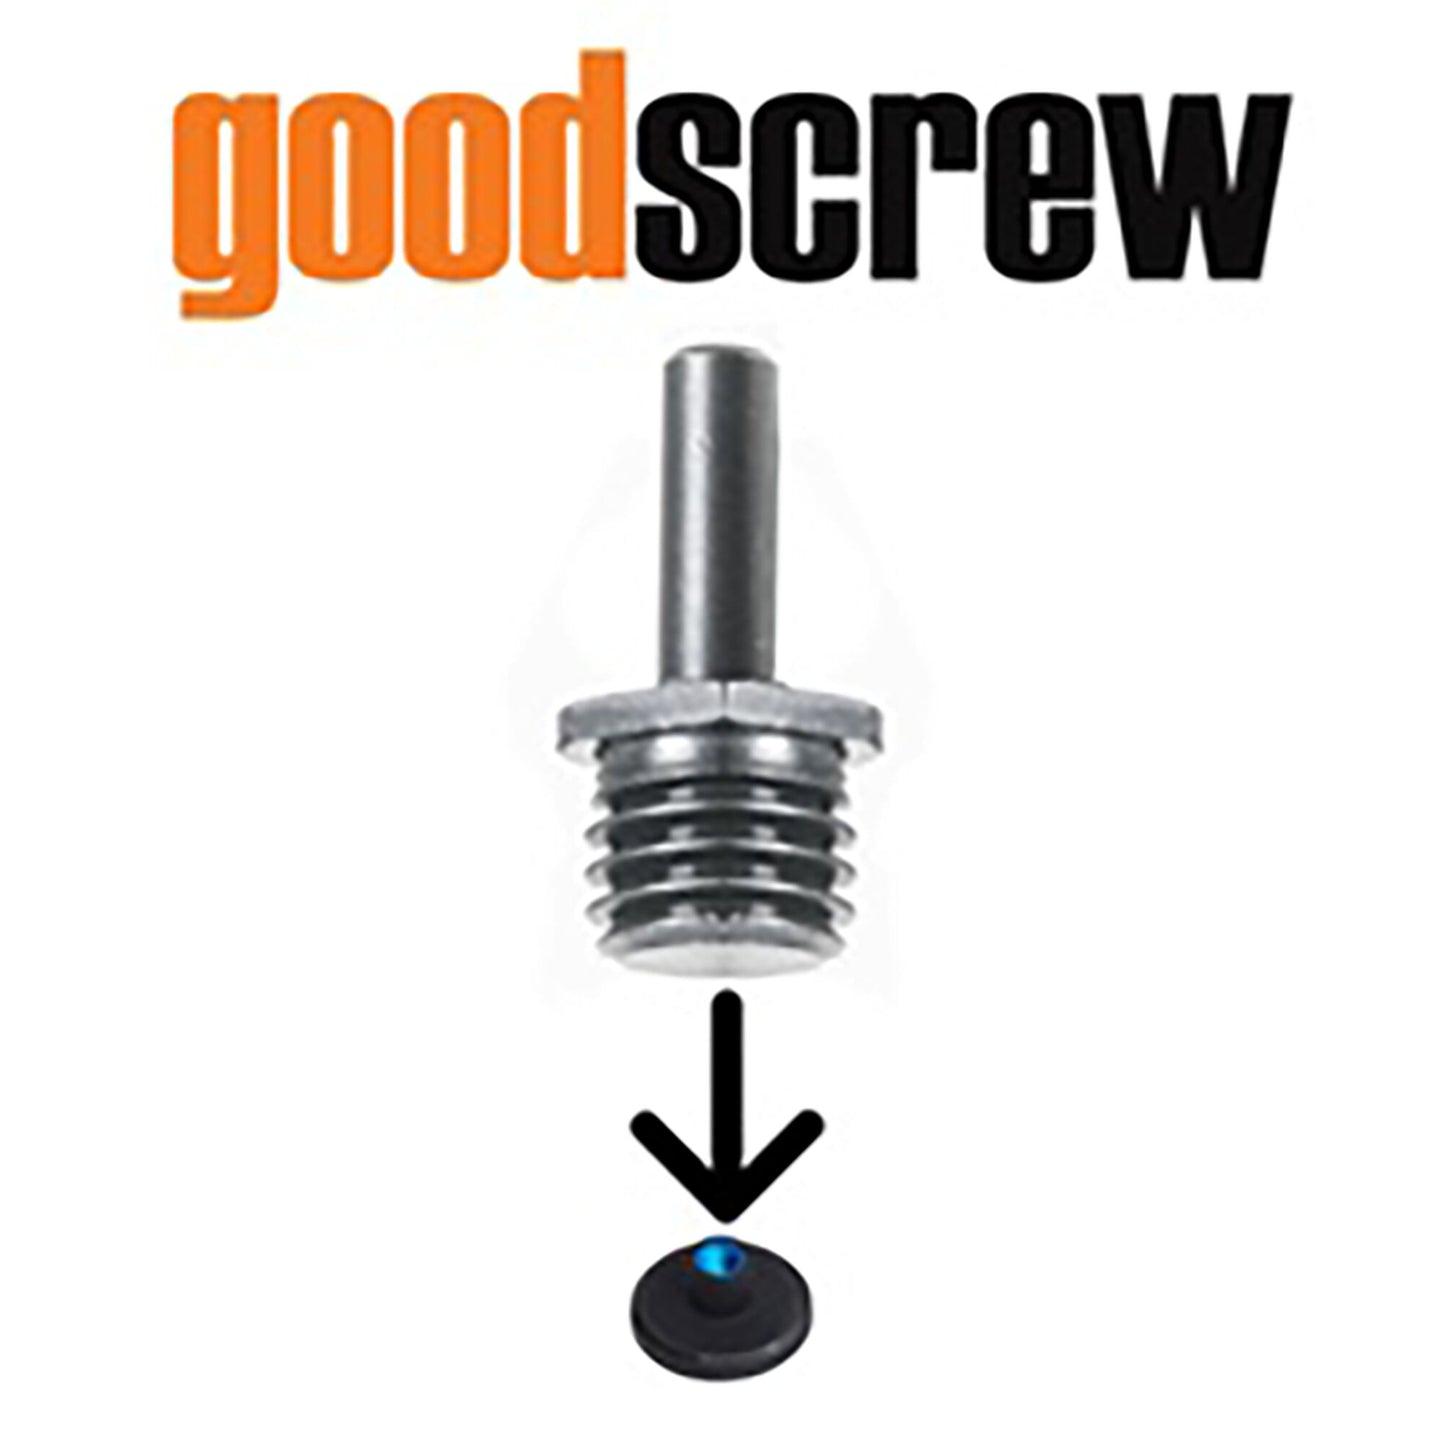 Good Screw Power Drill Adapter for Rotary Backing Plates